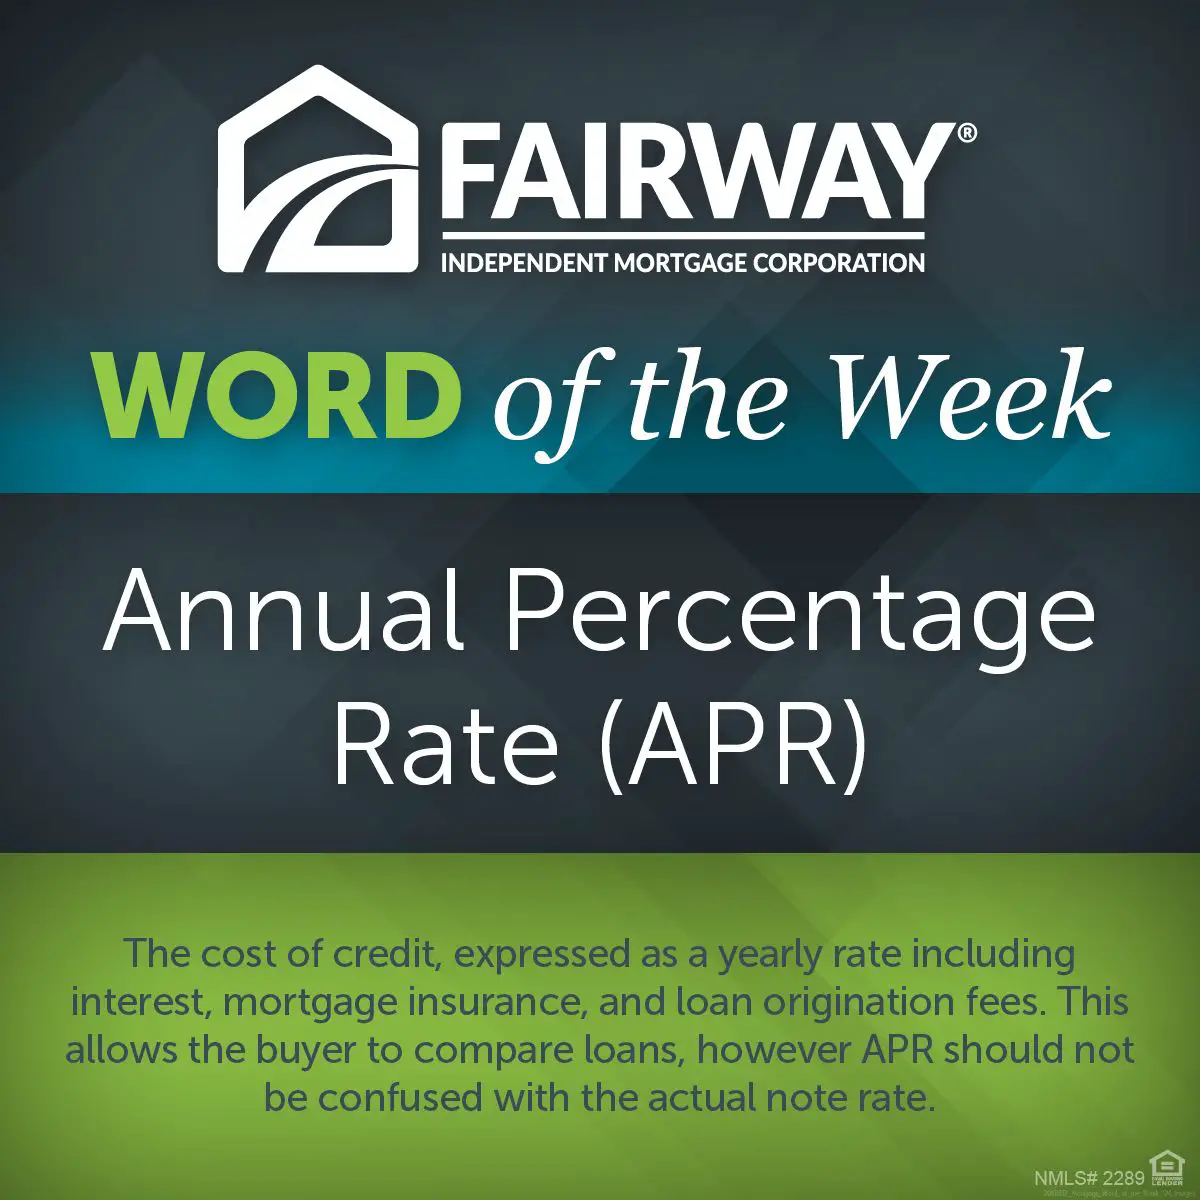 How is the APR different from the Mortgage Interest Rate?